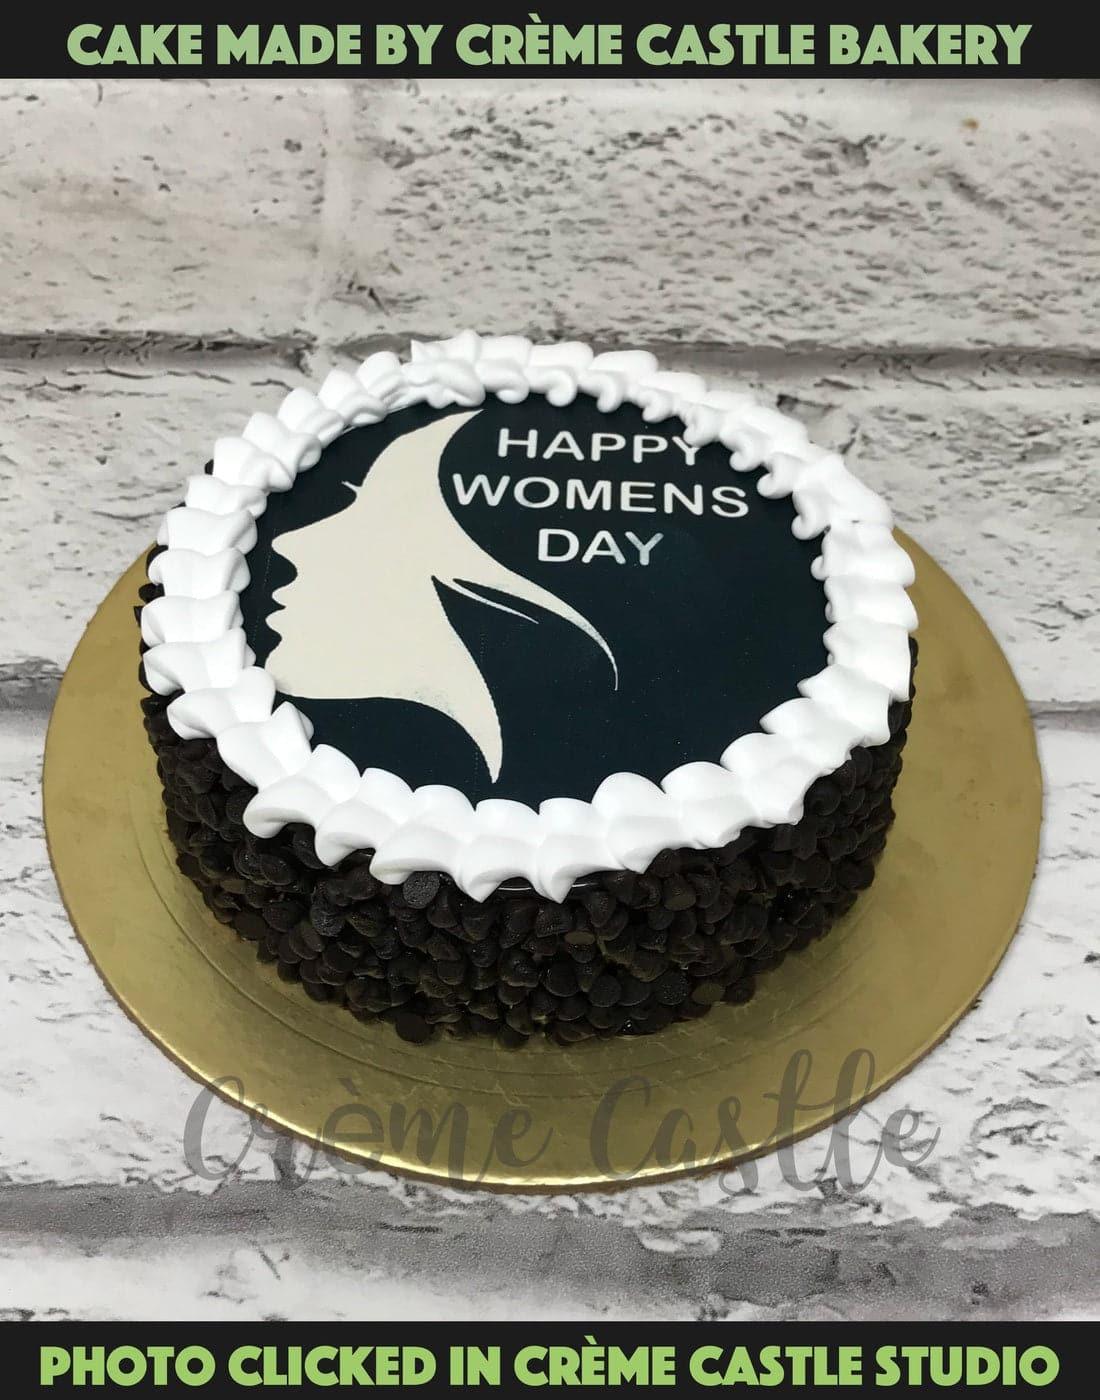 Seven Awesome Women's Day Cakes from Bakingo